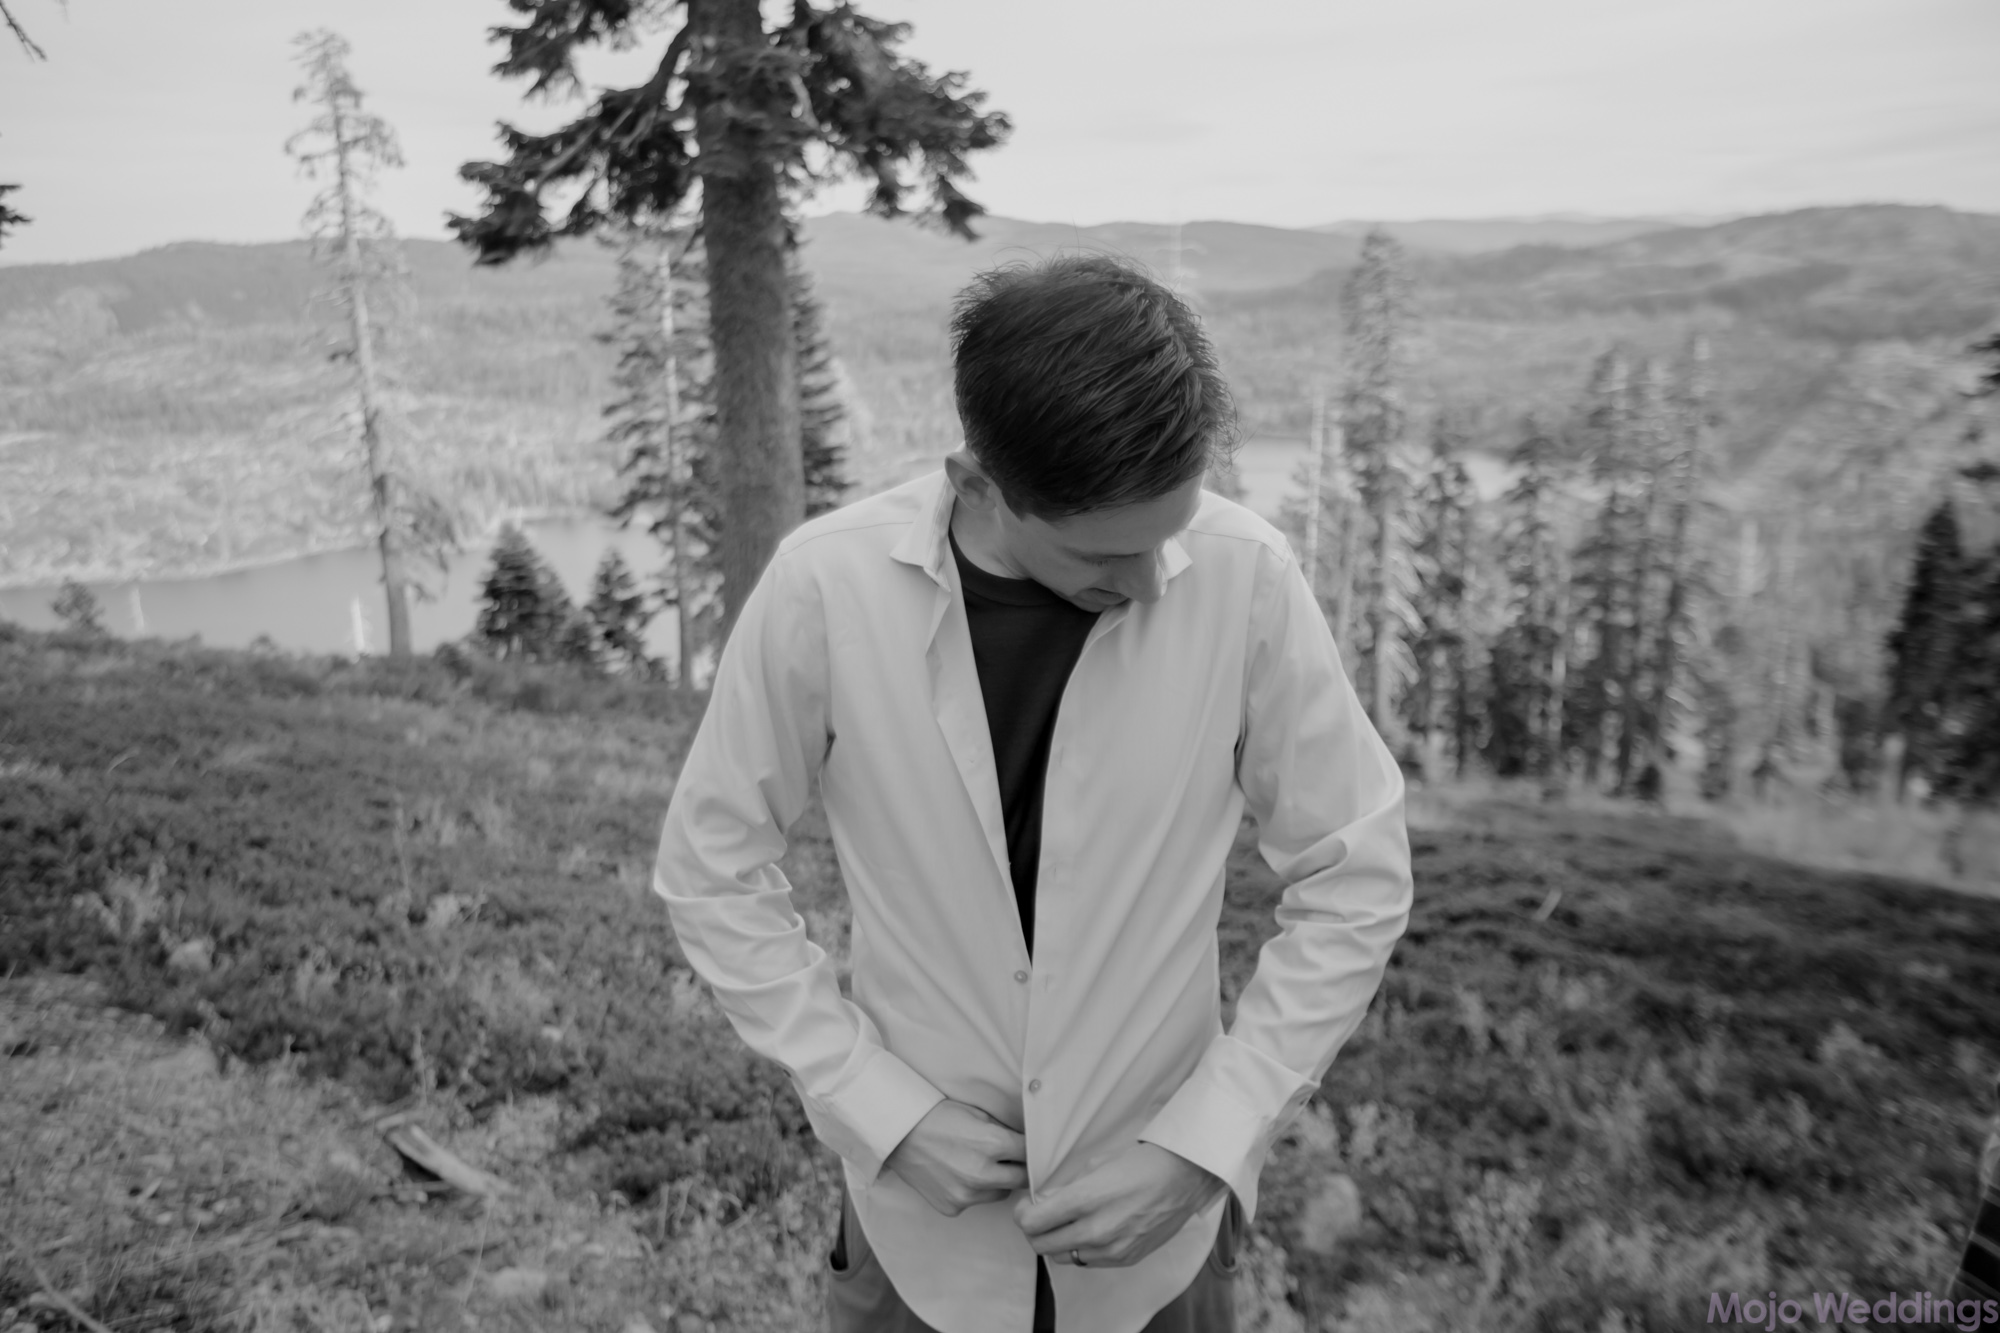 A black and white of the groom getting ready in the mountains.